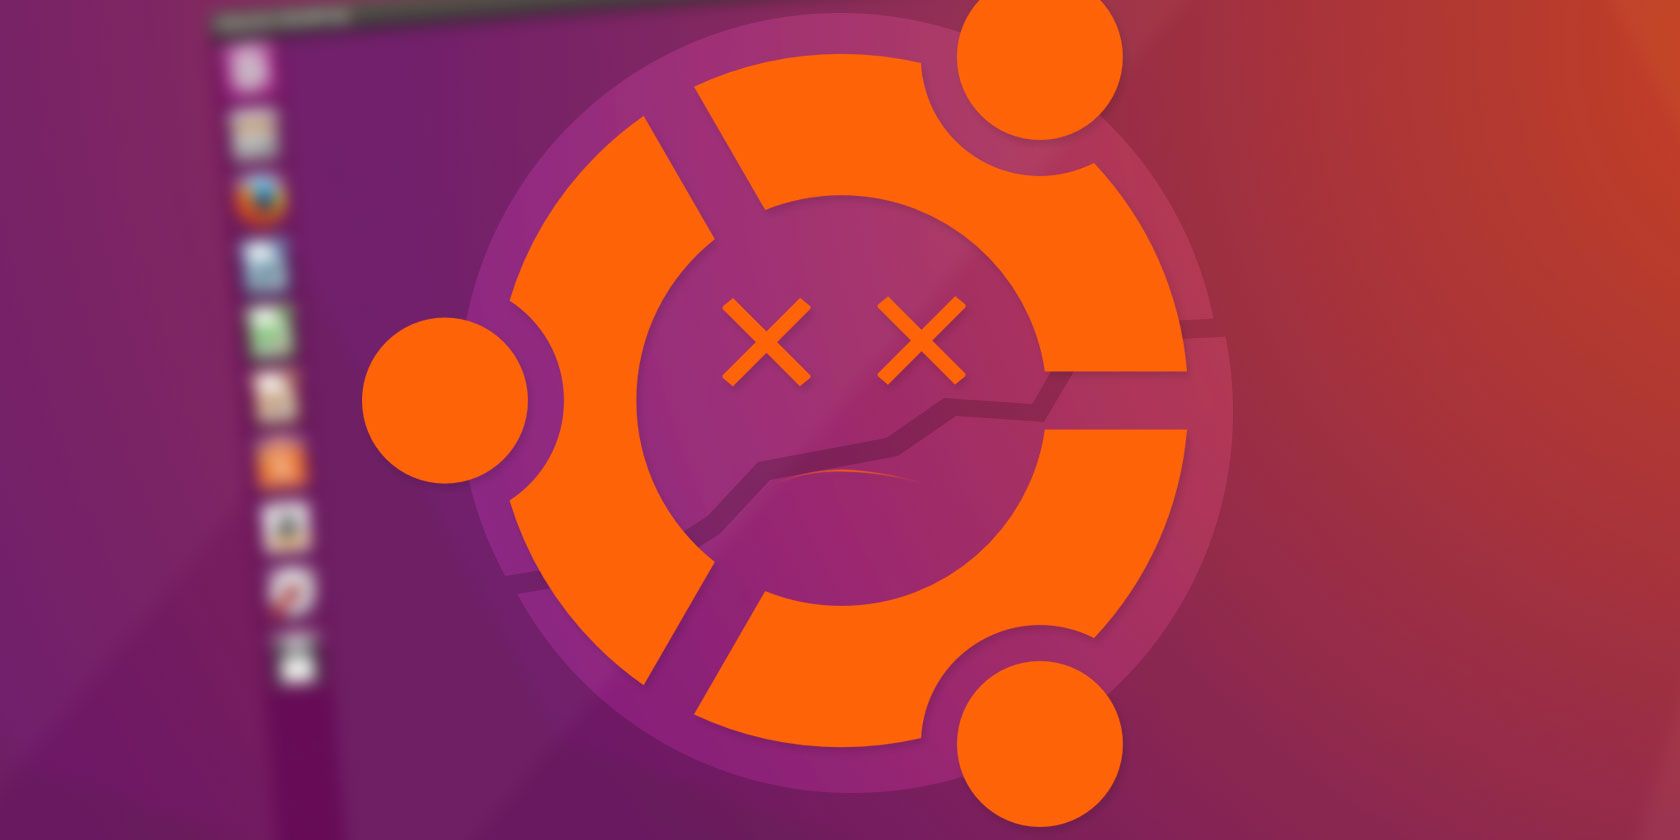 How to Fix Your Ubuntu Linux PC When It Won't Boot